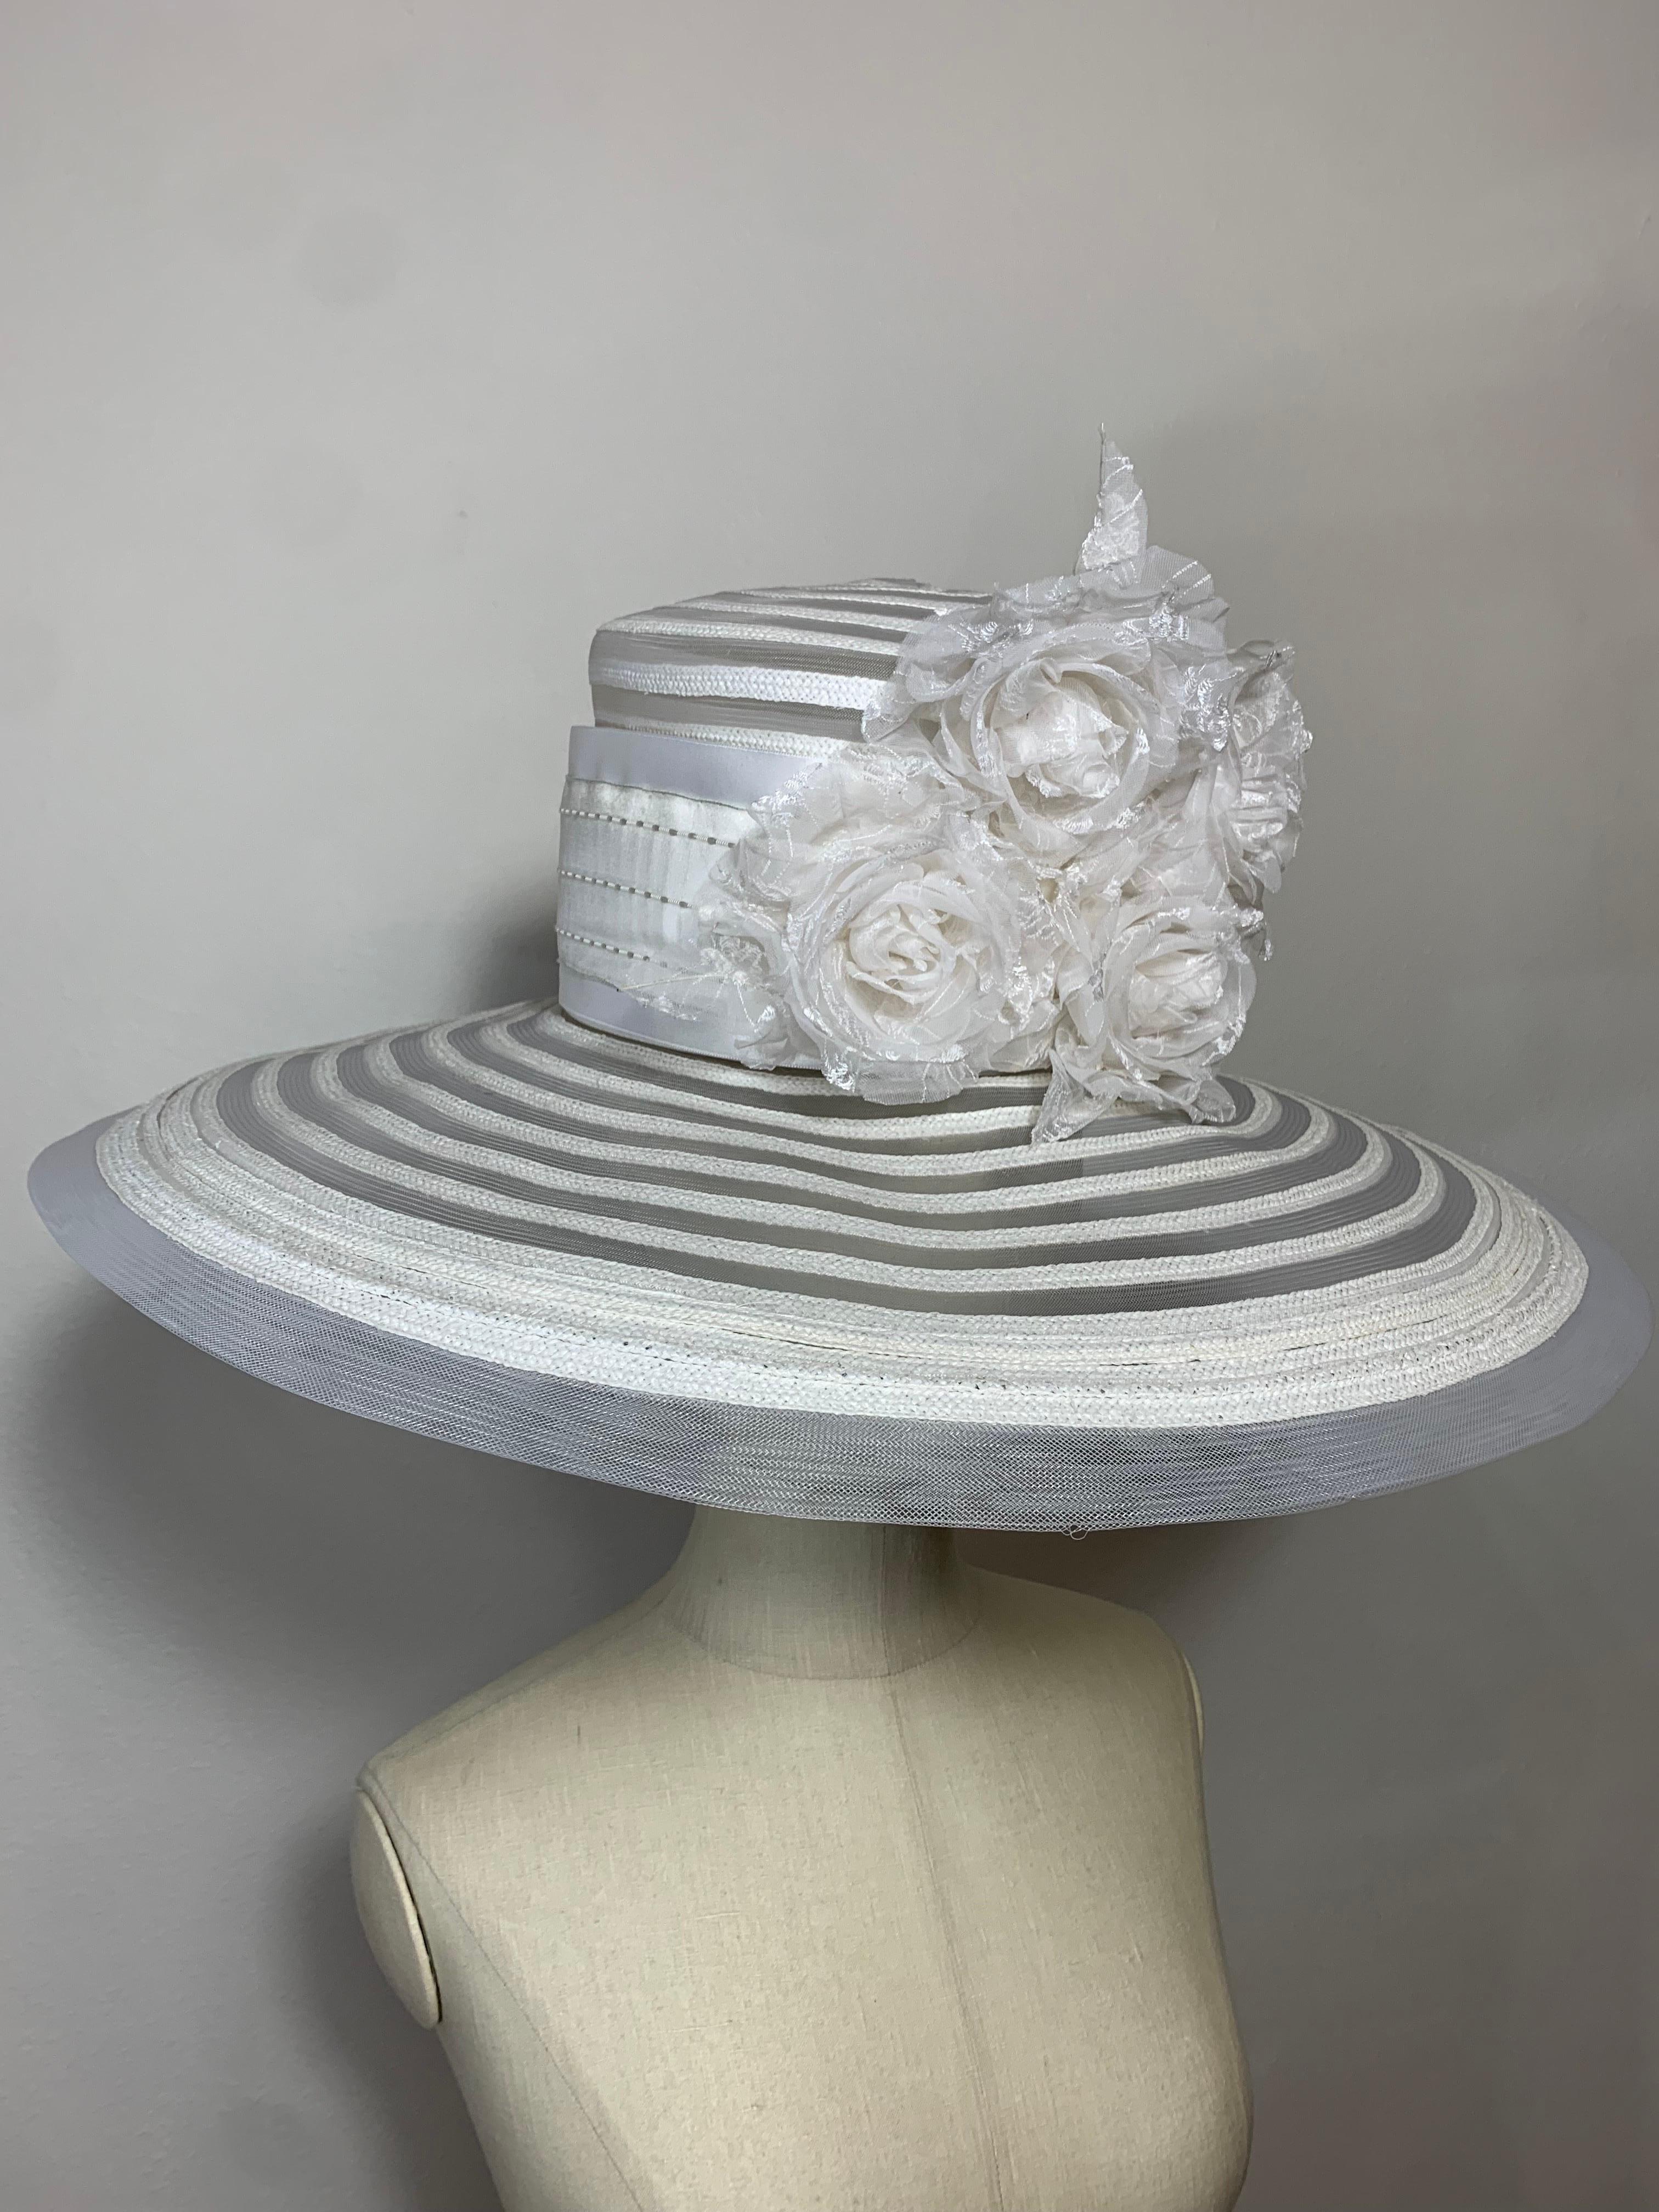 Maison Michel Spring/Summer Sheer White Striped Straw Wide Brim Hat w Florals: Concentric alternating circles of ultra-sheer horsehair and white straw give this extraordinary made-to-order hat a striking look. Very wide 23